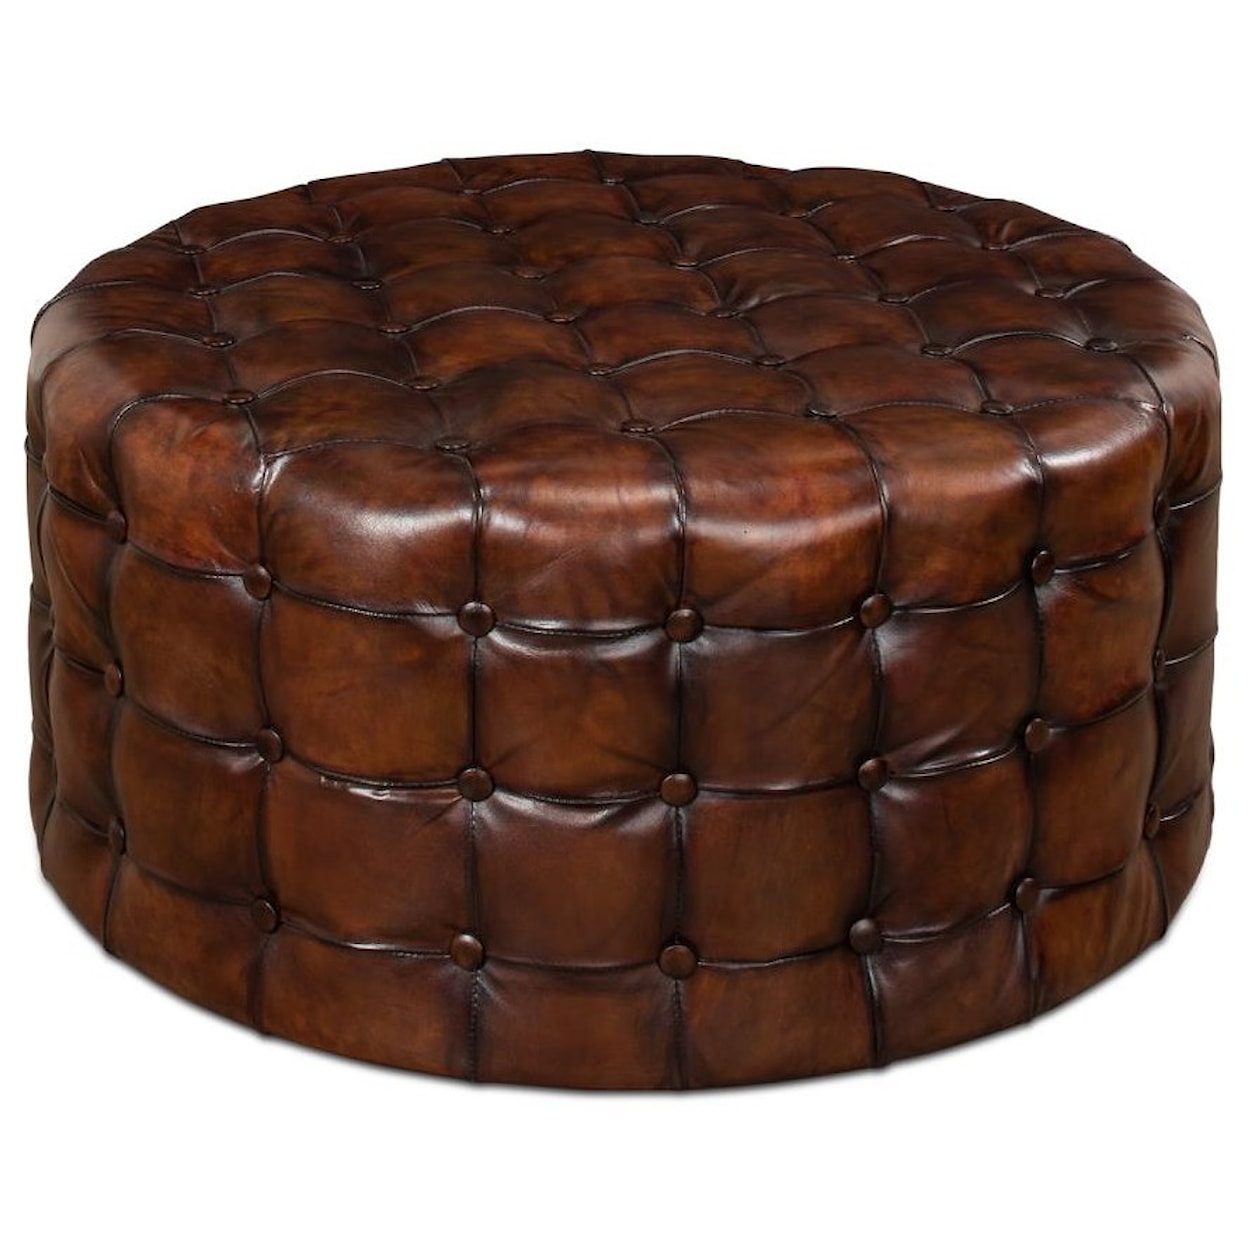 Sarreid Ltd Benches, Stools and Ottomans Leather Tufted Ottoman